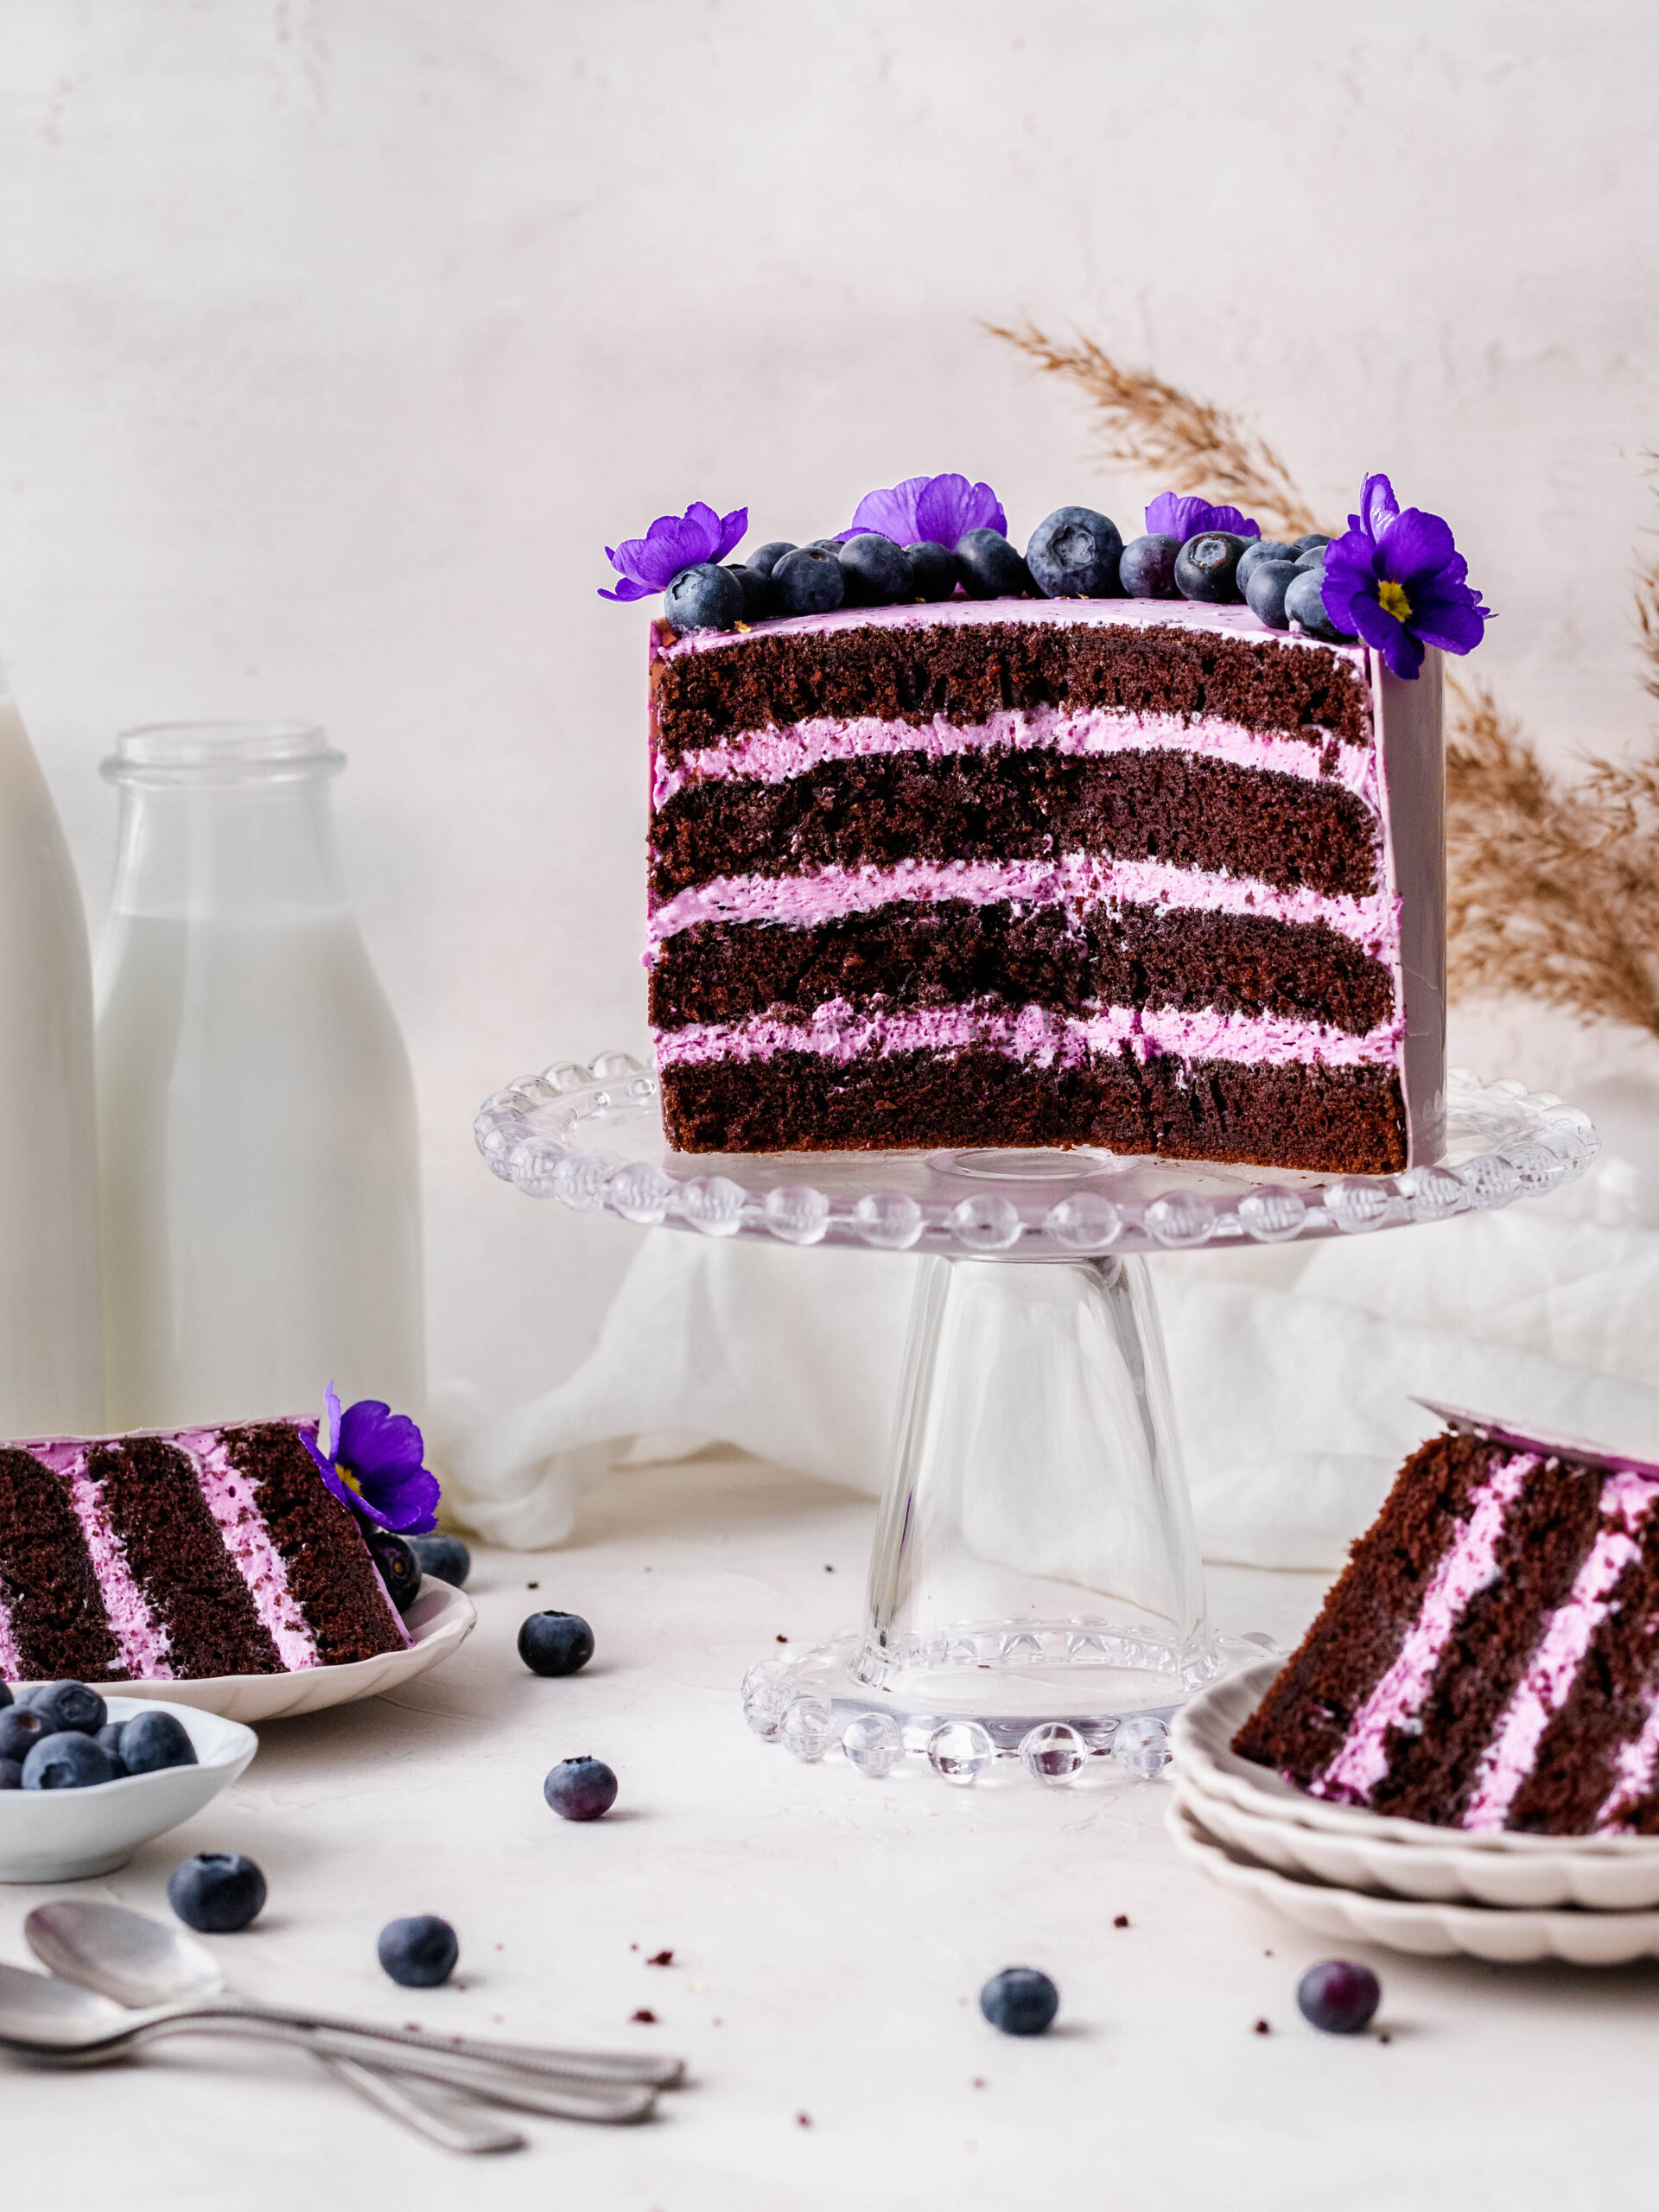 Blueberry Cream Cheese Chocolate Cake on a cake stand.